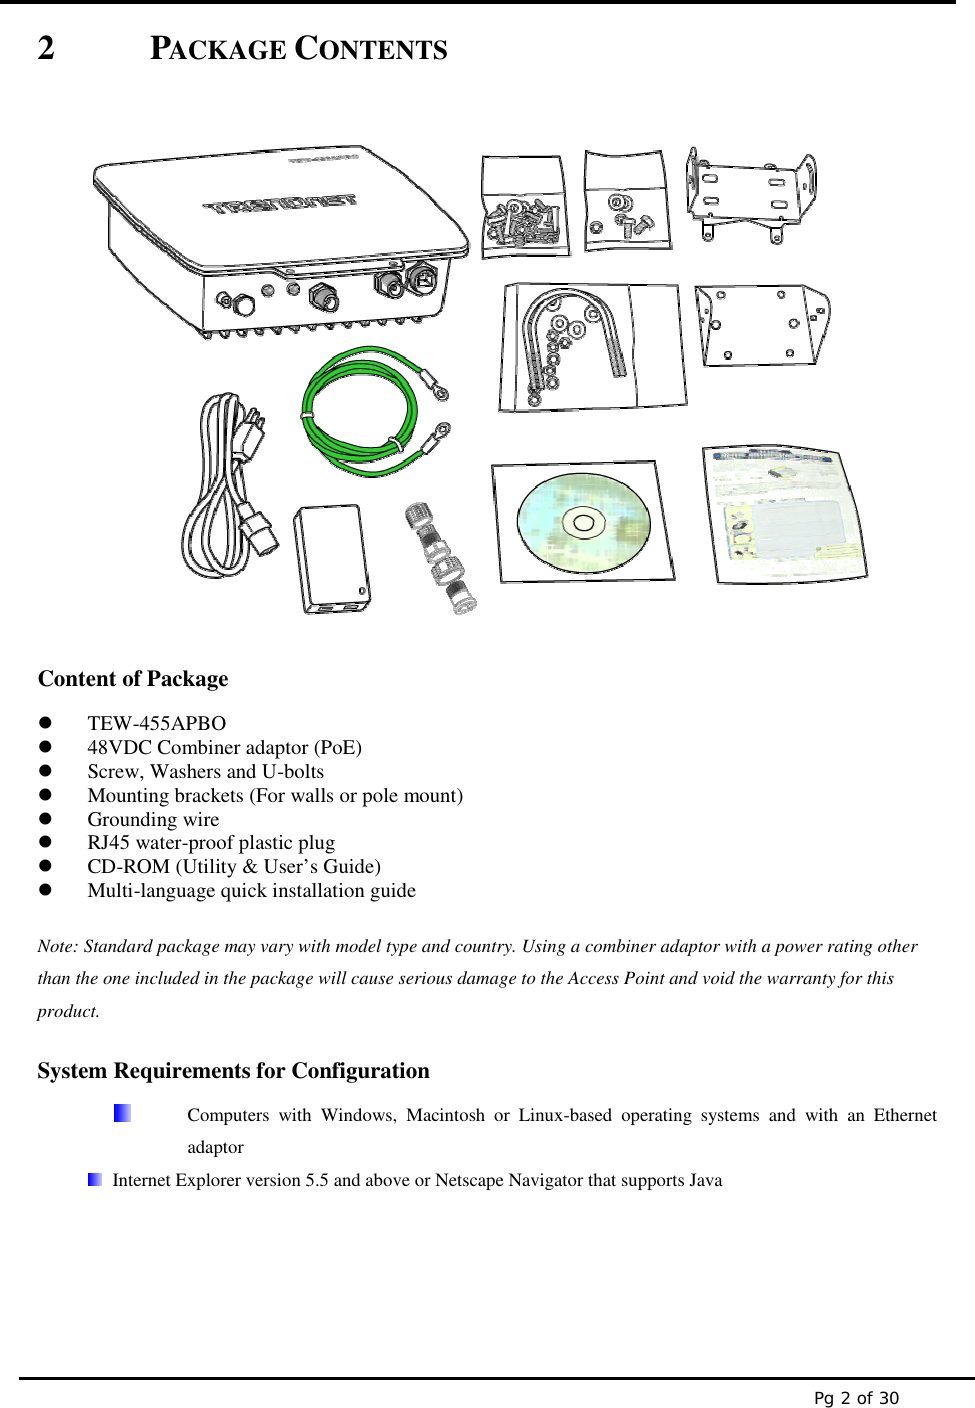 Pg 2 of 302 PACKAGE CONTENTSContent of PackageTEW-455APBO48VDC Combiner adaptor (PoE)Screw, Washers and U-boltsMounting brackets (For walls or pole mount)Grounding wireRJ45 water-proof plastic plugCD-ROM (Utility &amp; User’s Guide)Multi-language quick installation guideNote: Standard package may vary with model type and country. Using a combiner adaptor with a power rating otherthan the one included in the package will cause serious damage to the Access Point and void the warranty for thisproduct.System Requirements for ConfigurationComputers with Windows, Macintosh or Linux-based operating systems and with an EthernetadaptorInternet Explorer version 5.5 and above or Netscape Navigator that supports Java